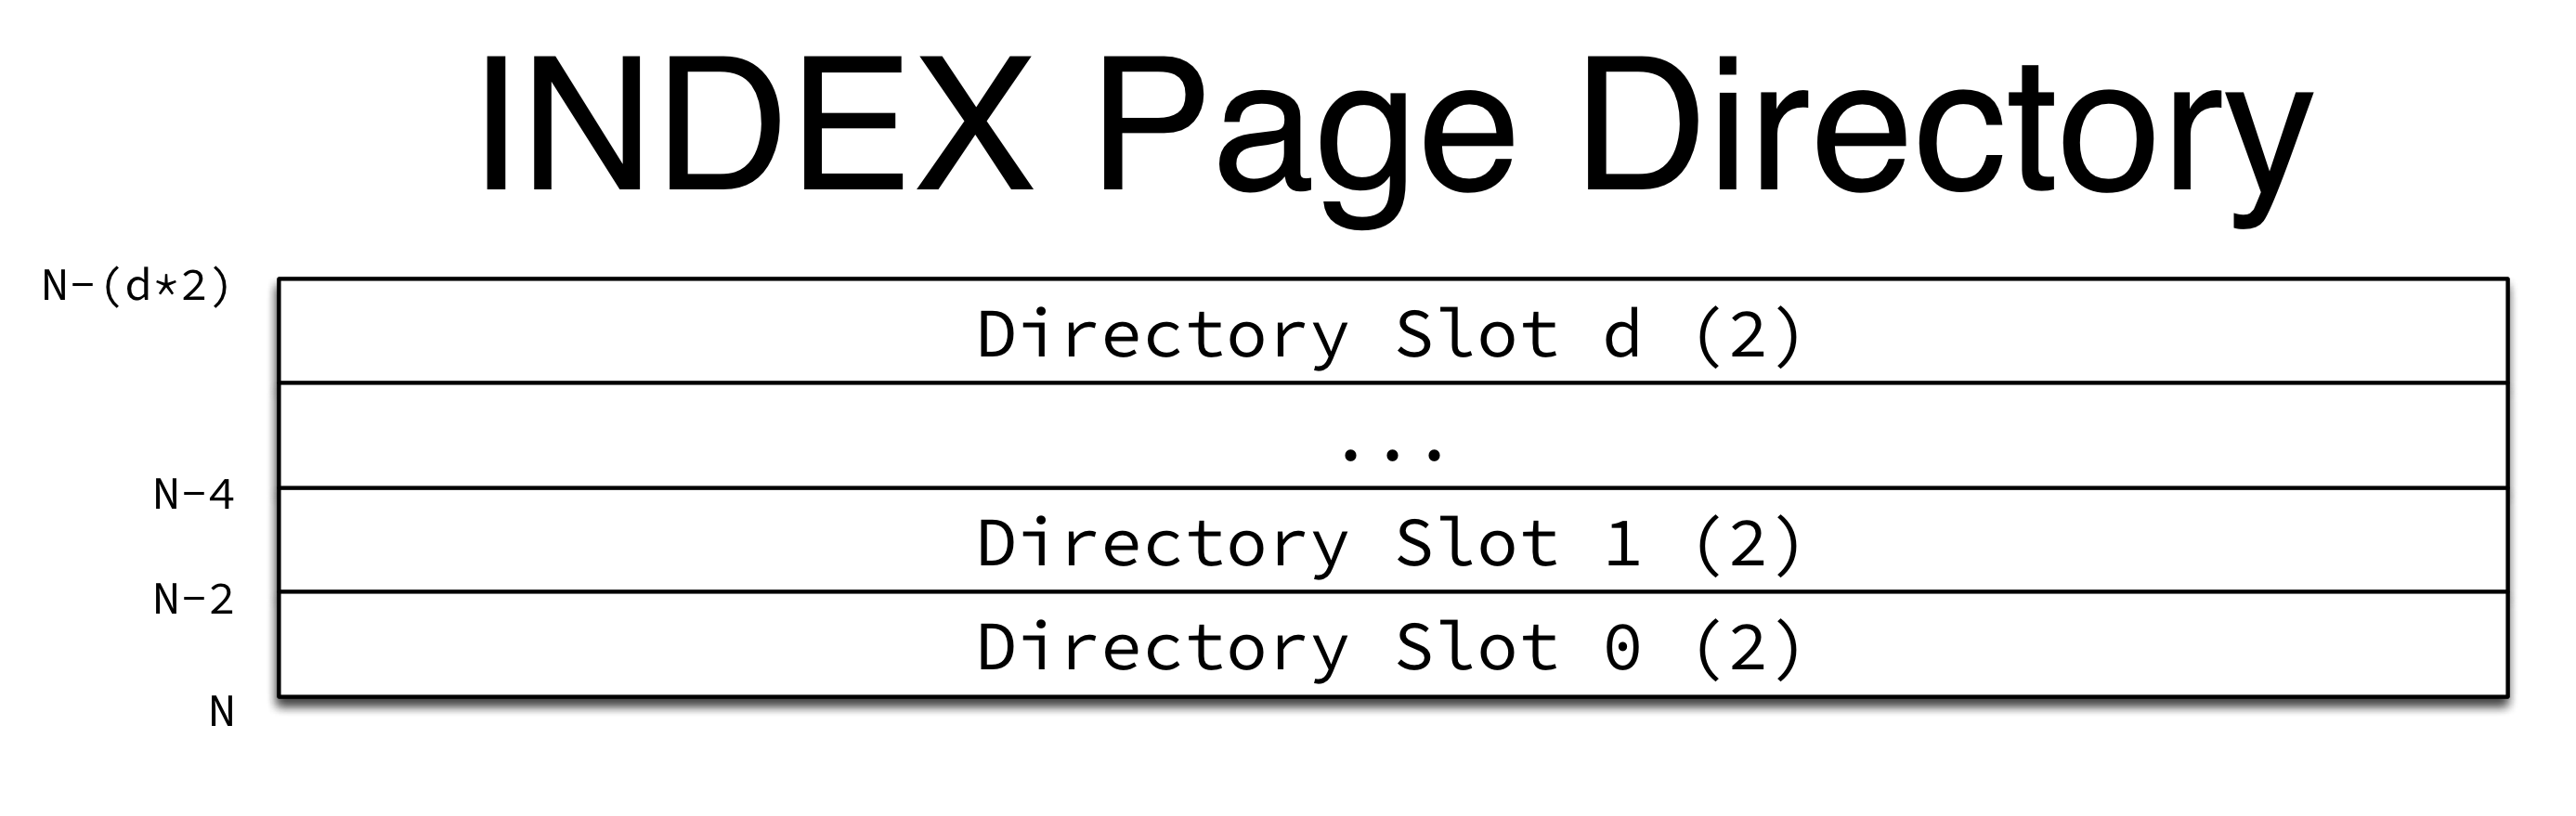 INDEX Page Directory